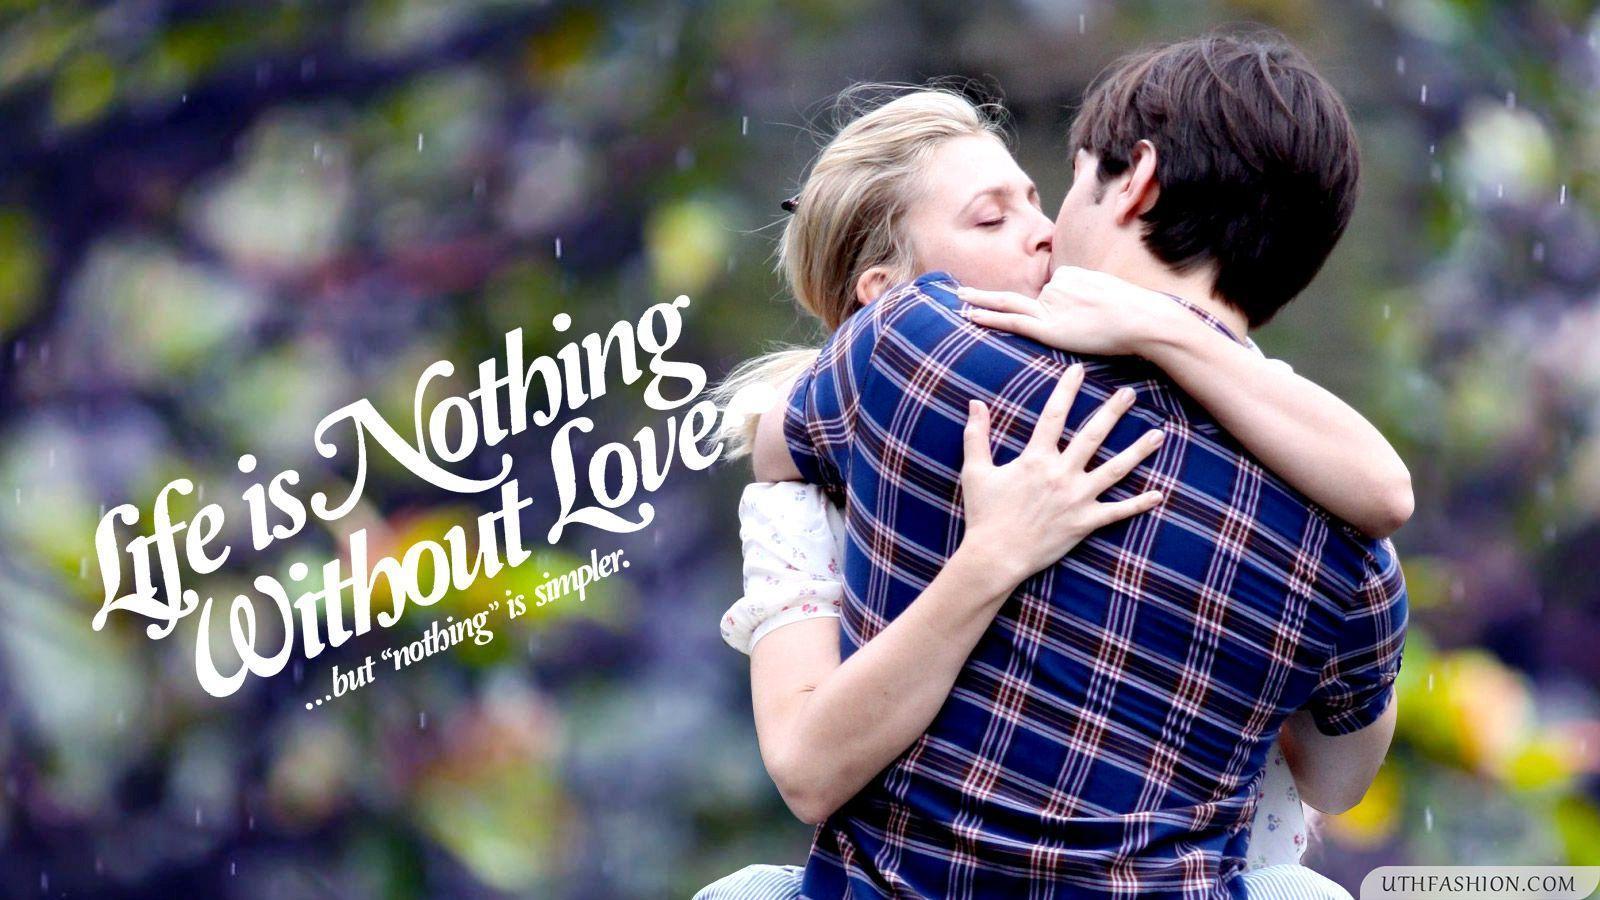 Beautiful Love Wallpapers With Quotes Free Download